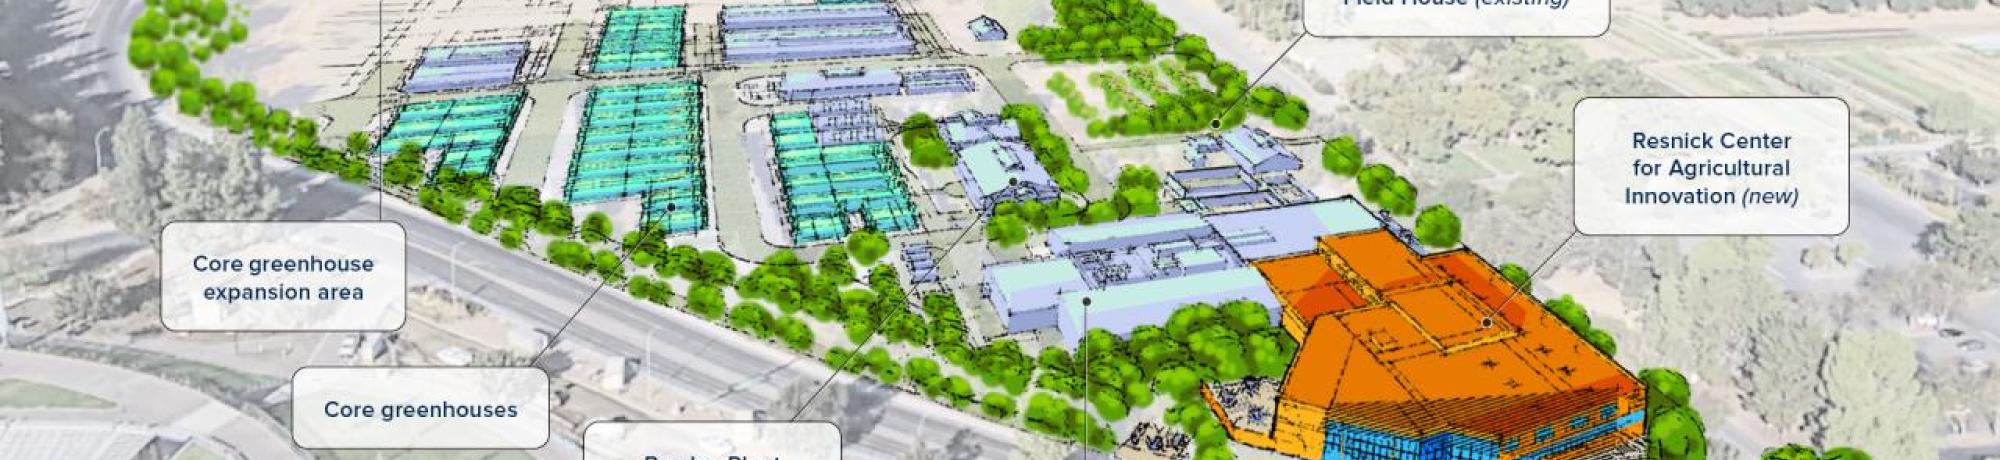 An artistic rendering of the 40,000-square-foot Lynda and Stewart Resnick Center for Agricultural Innovation and its approximate location off Hutchison Drive in Davis. (UC Davis)